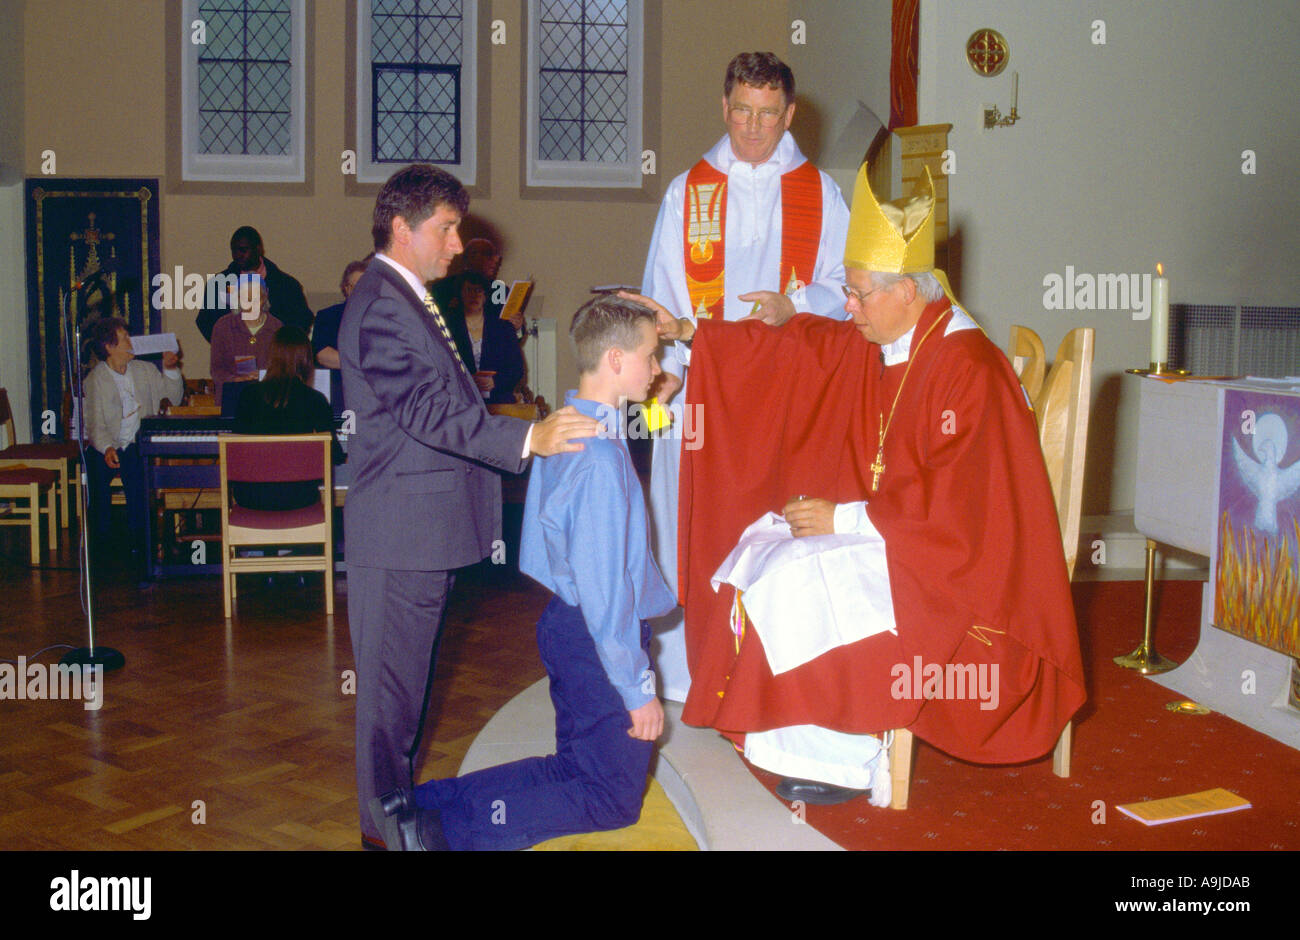 Confirmation At Pentecost Bishop Annointing Candidate at St Josephs Church Catholic London England Stock Photo